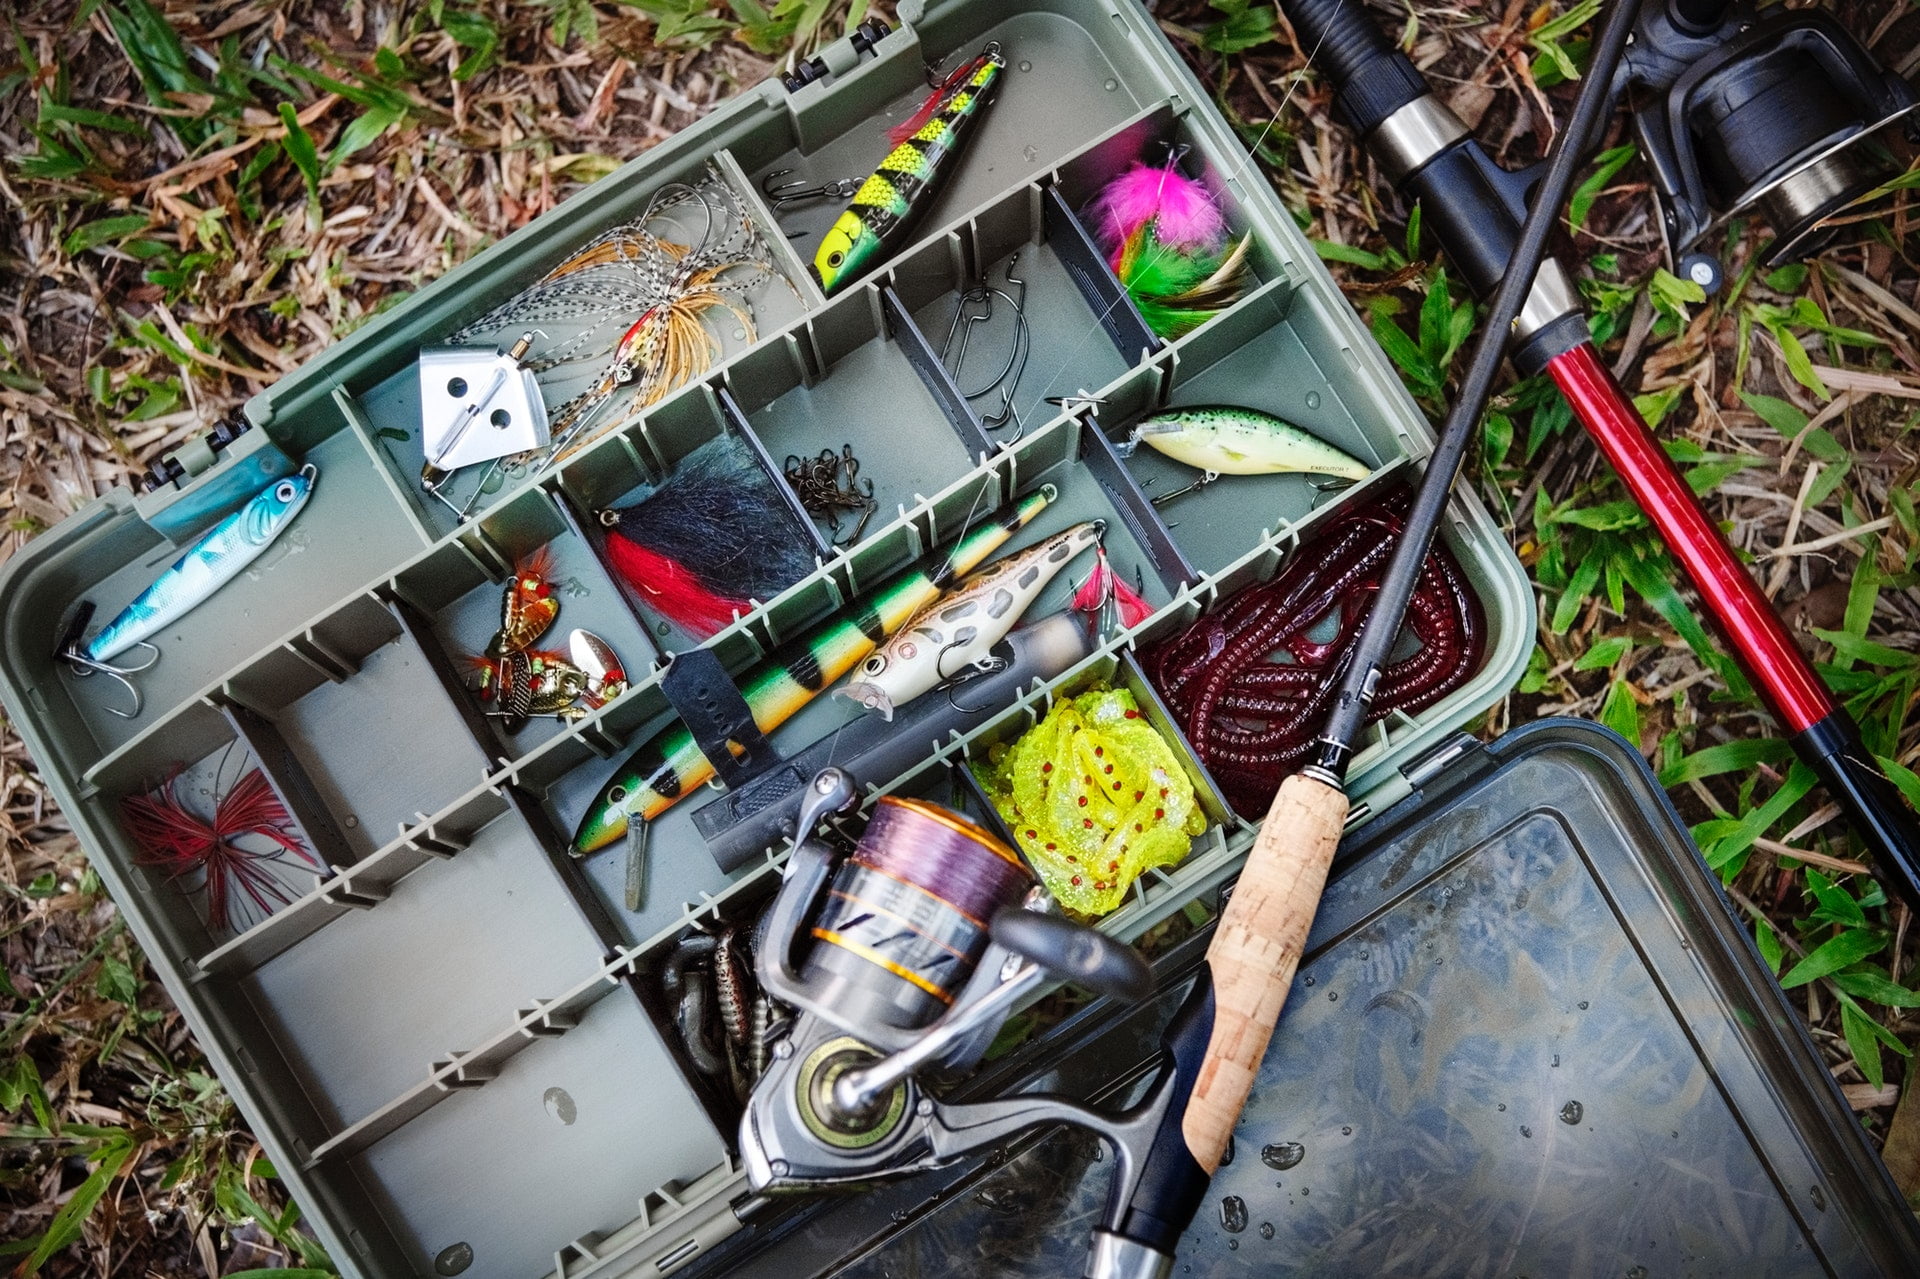 A Brief Review of the Best Fishing & Tackle Equipment Going into 2019